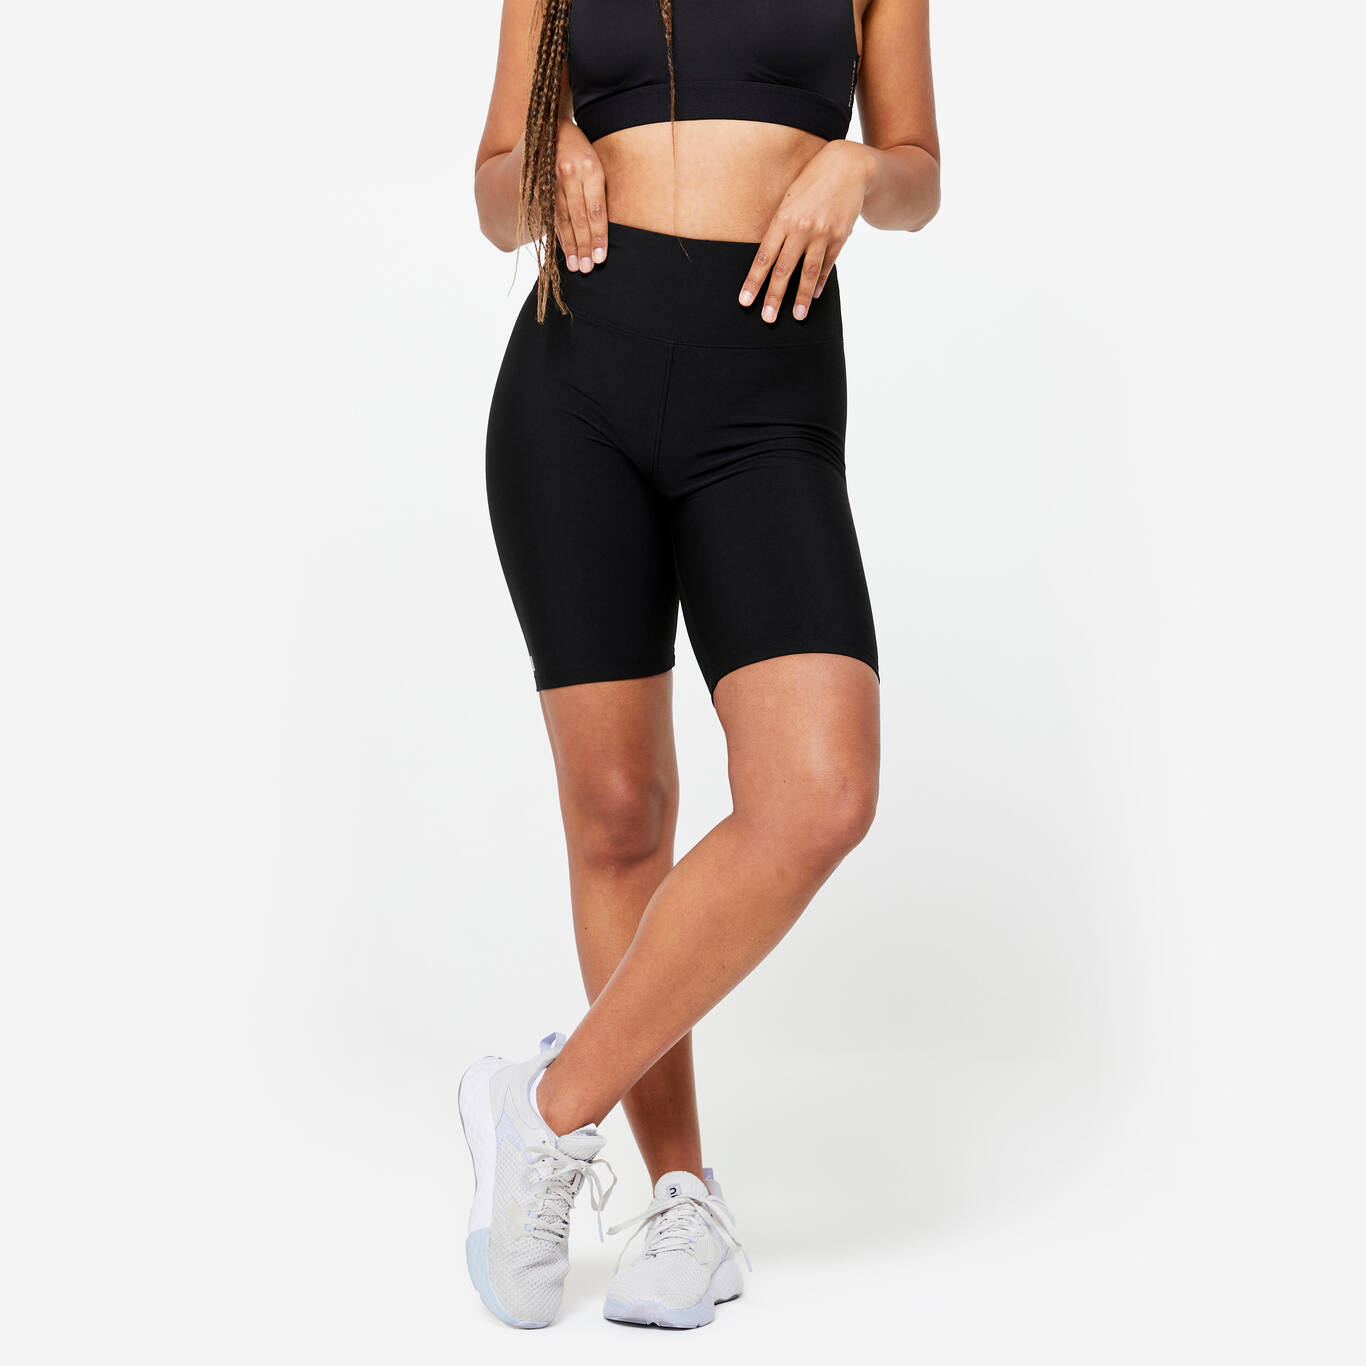 High-Waisted Fitness Cycling Shorts